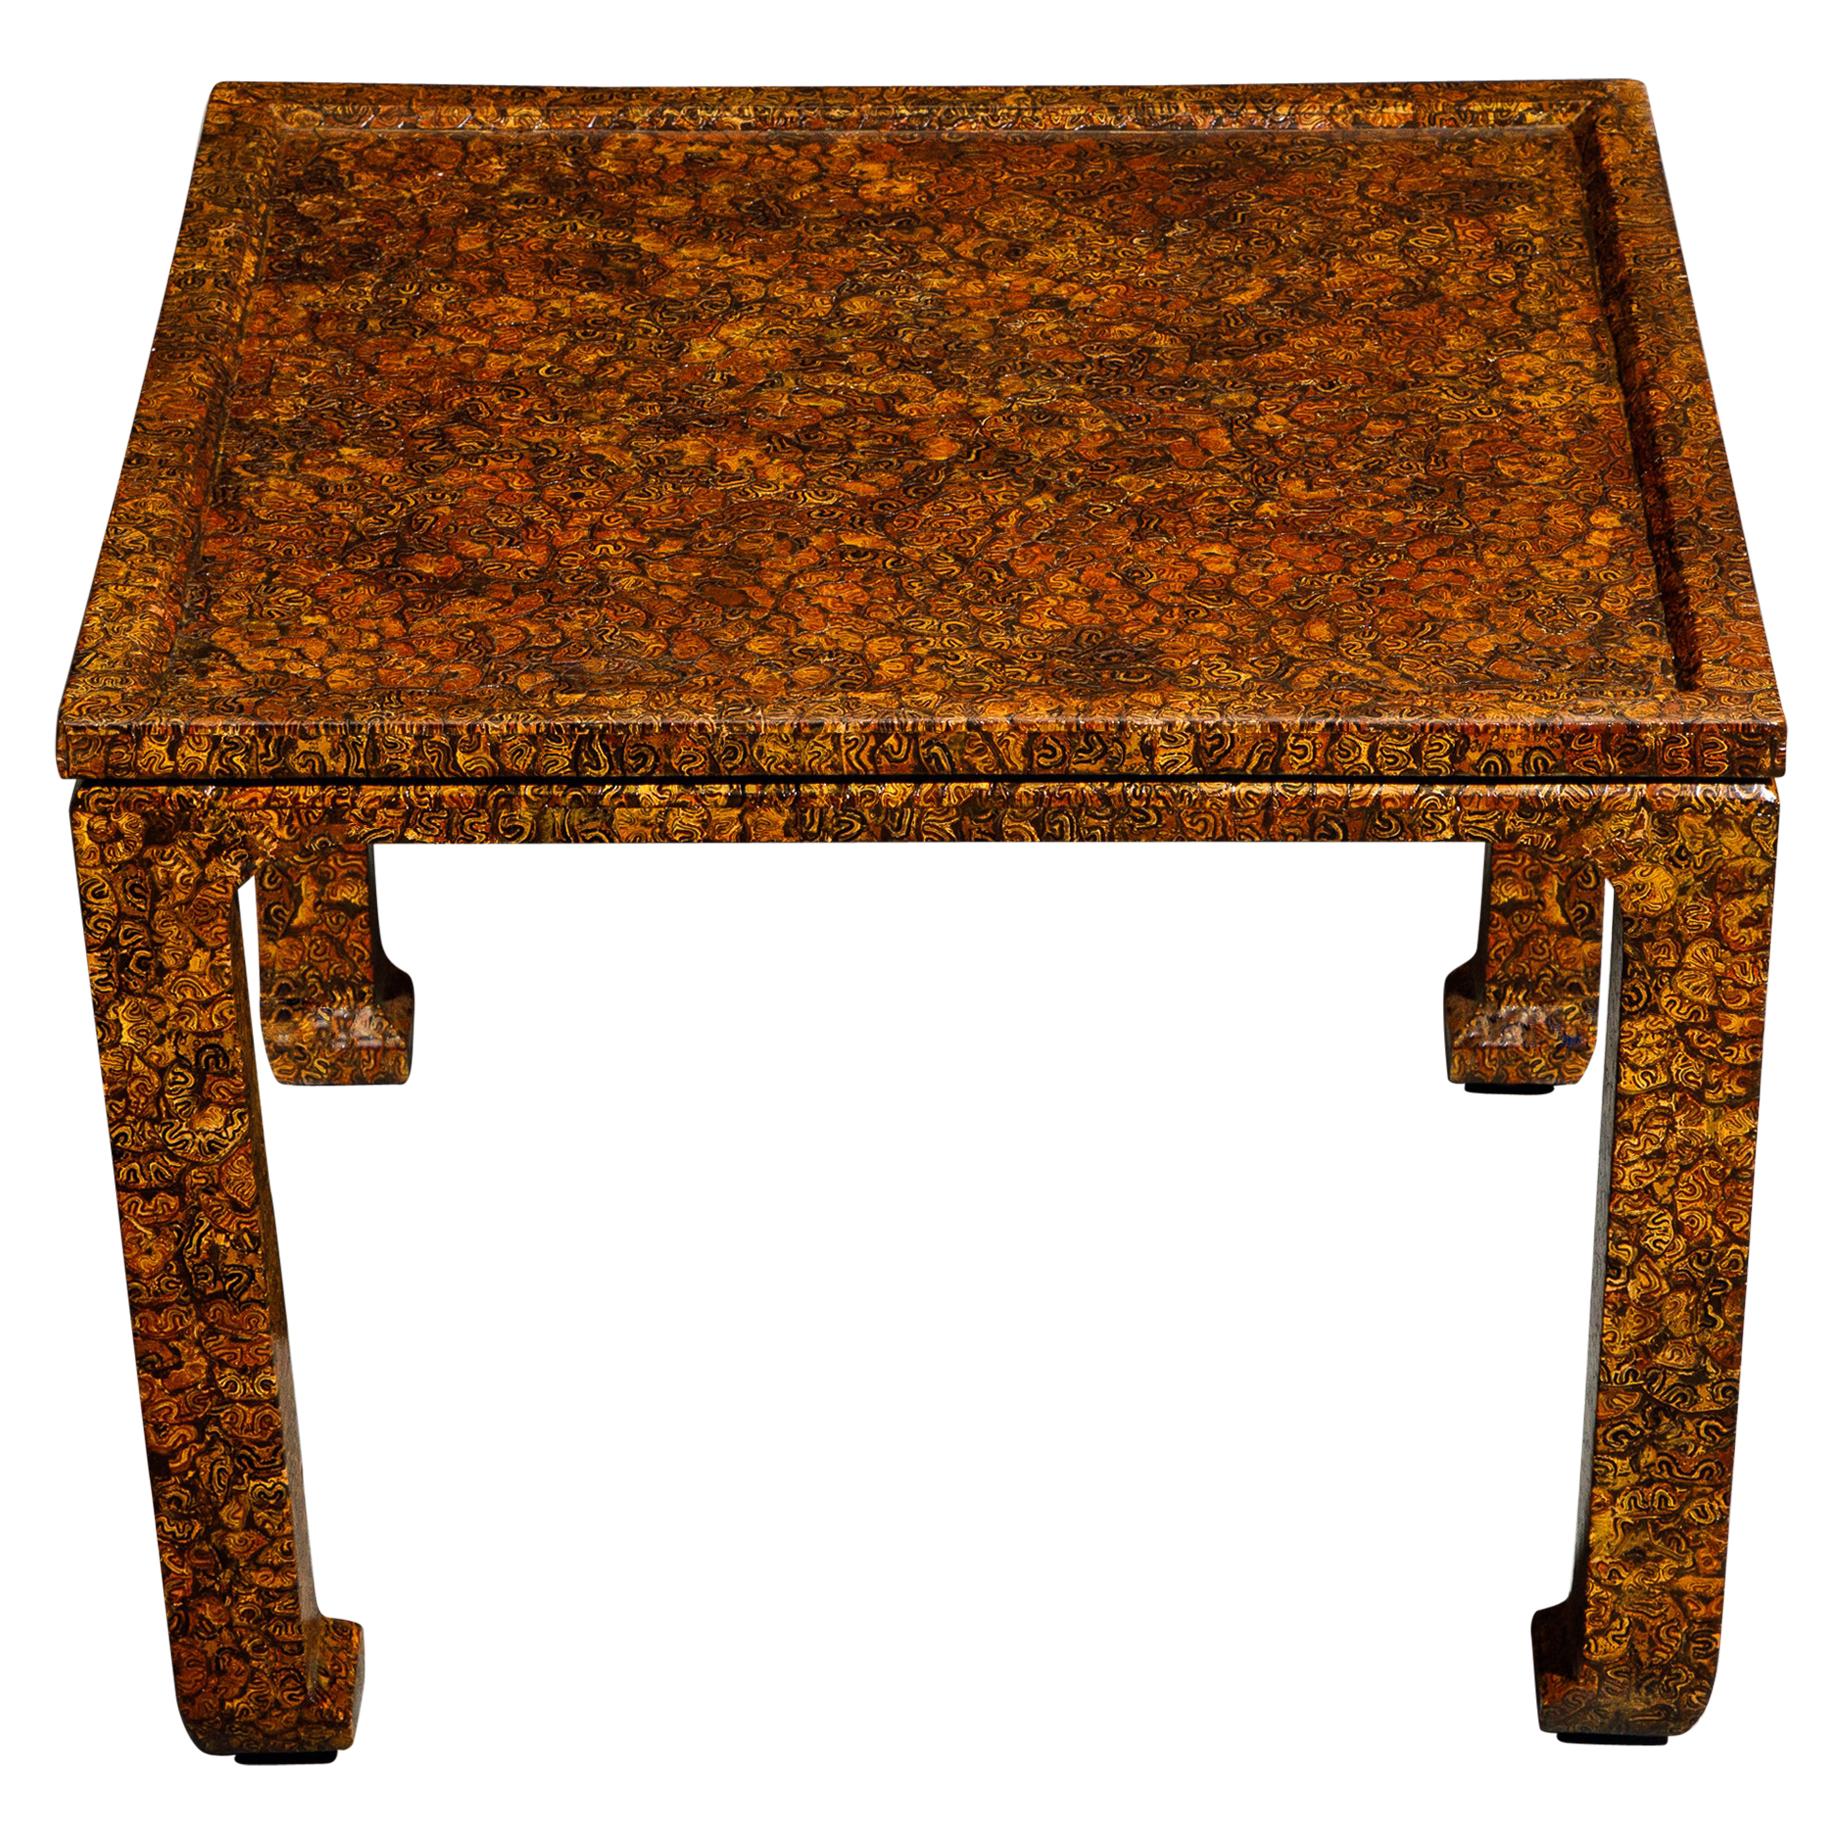 Stunning Exotic Wood Antique Breakfast Table or Center Table